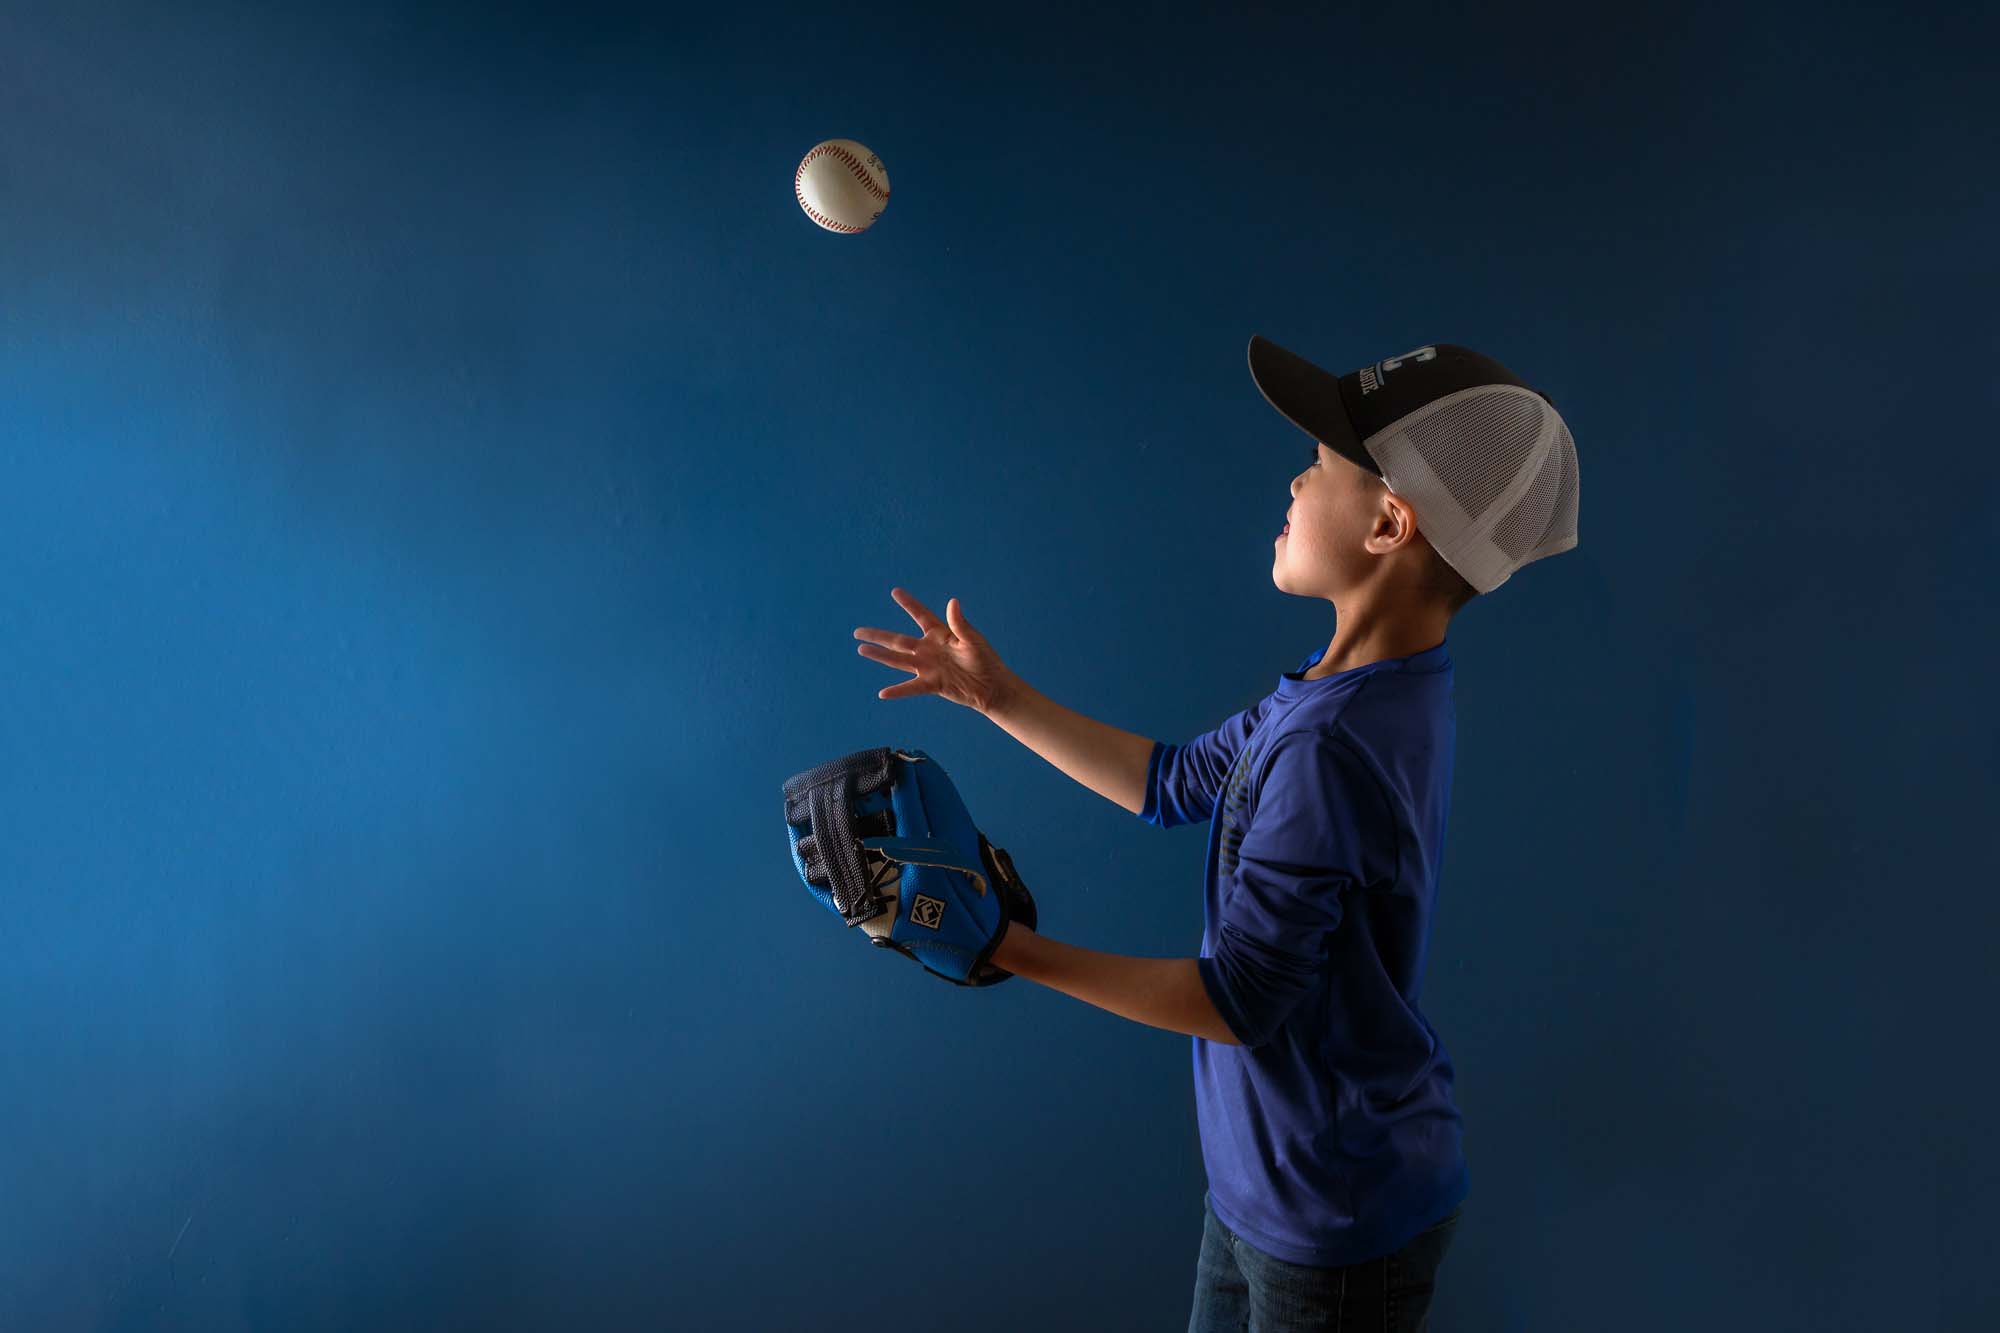 Photographing reluctant subjects - boy throwing baseball